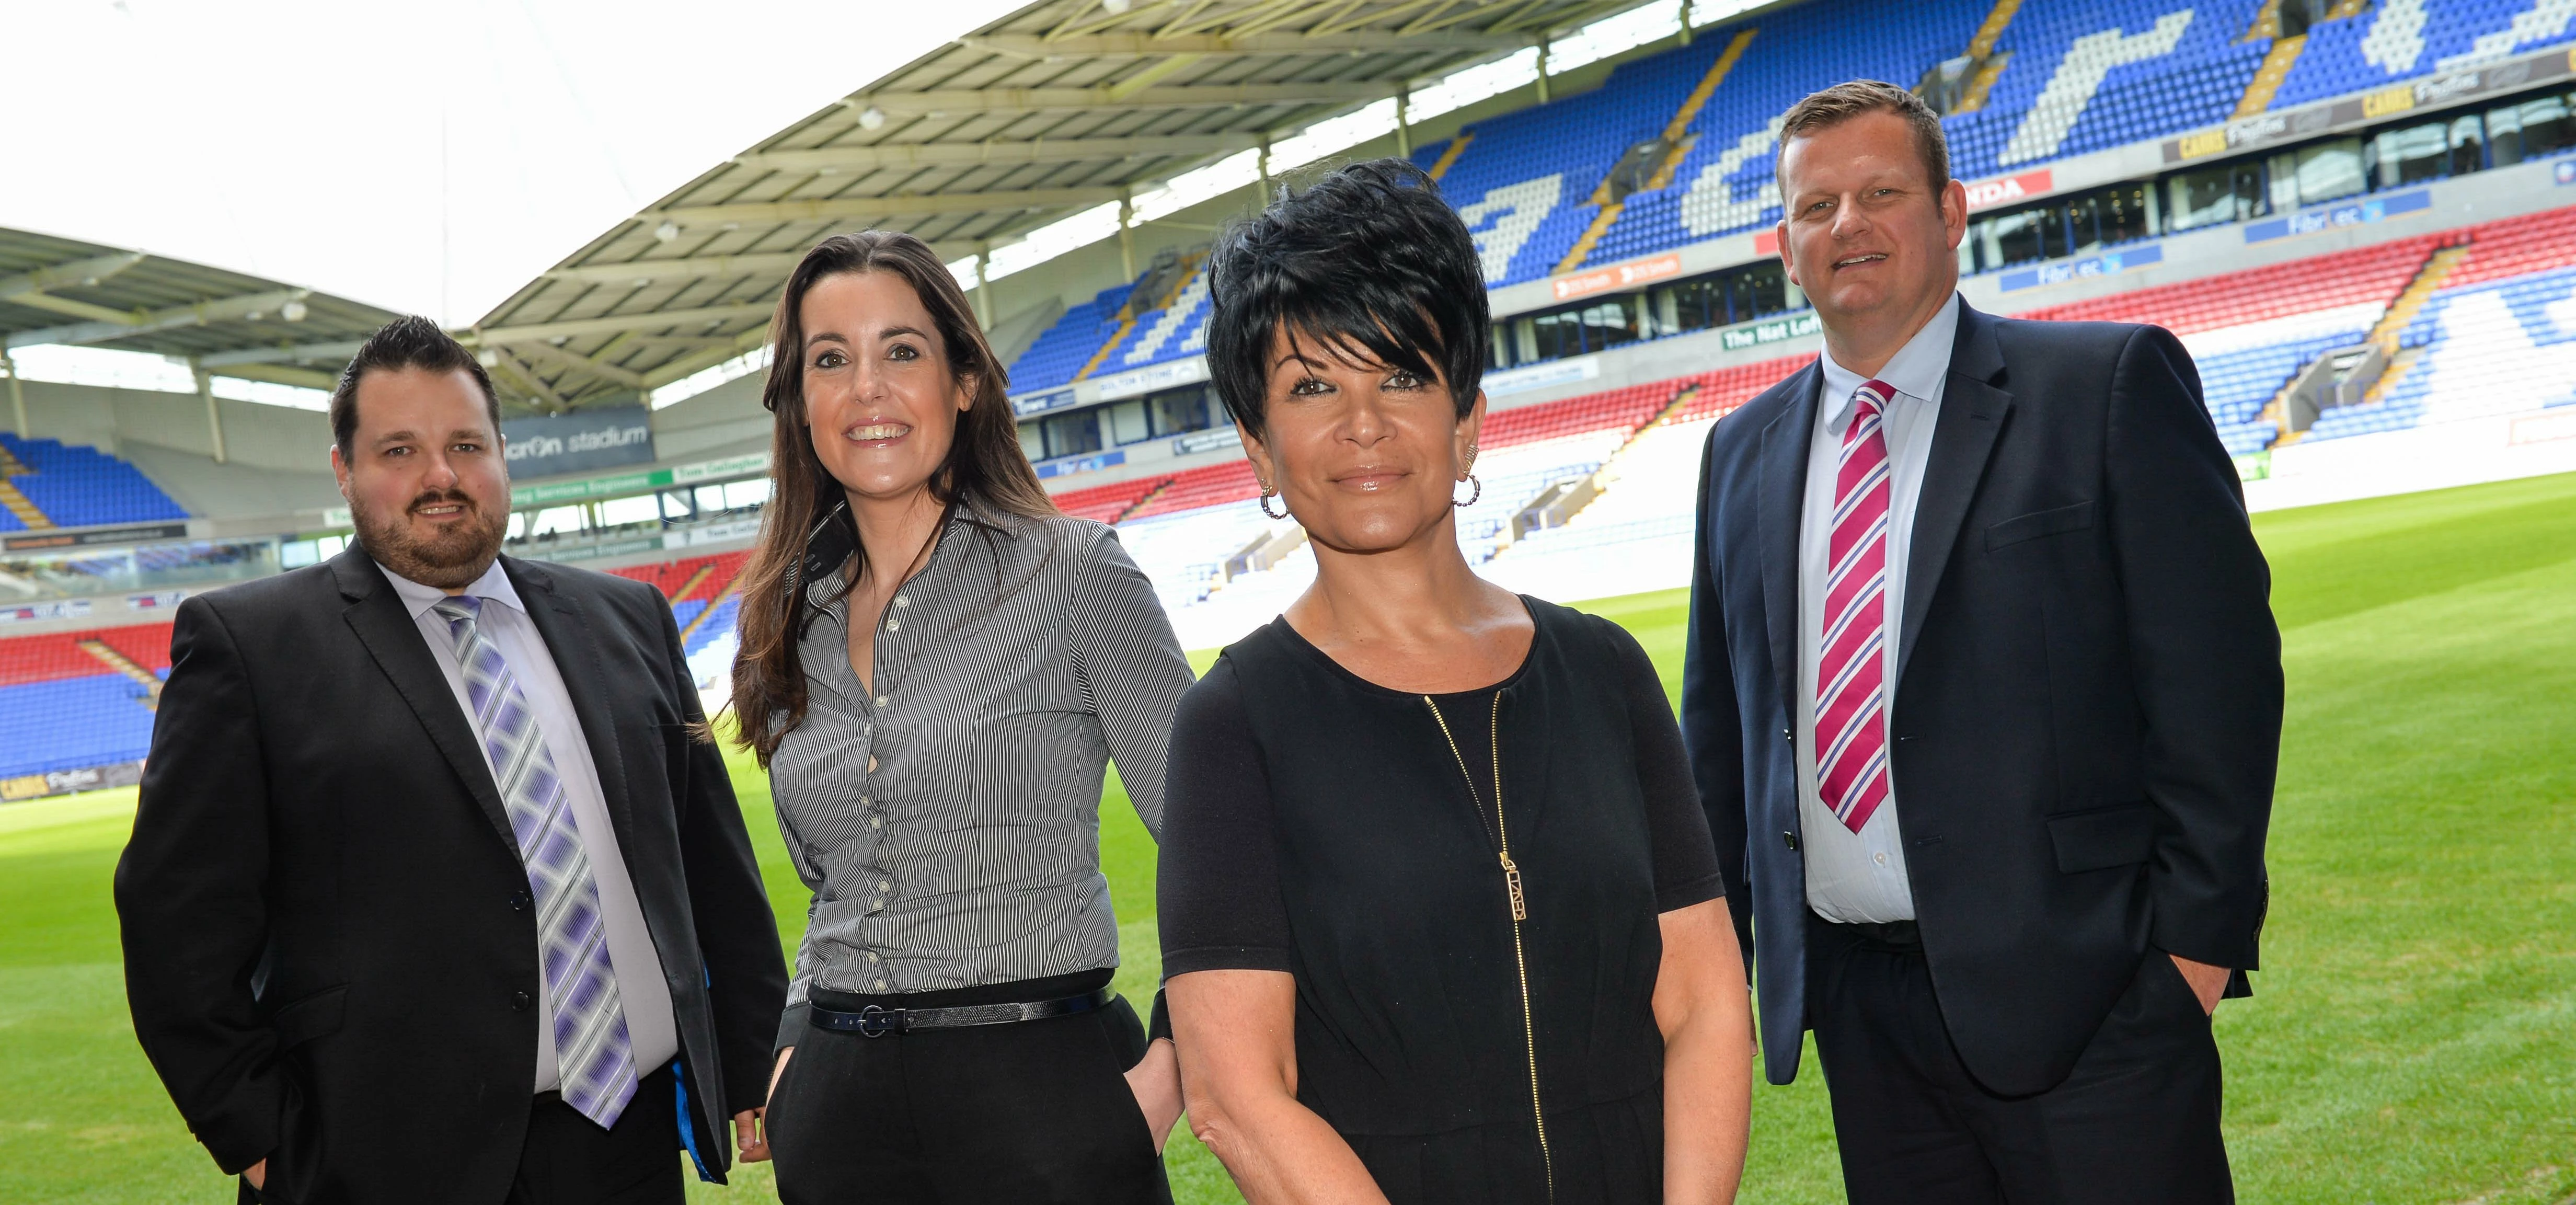 L-R: Bolton Whites Hotel's Carl D’Arcy and Suzanne Speak, TLC's Liz Taylor, and Macron Stadium's Dam